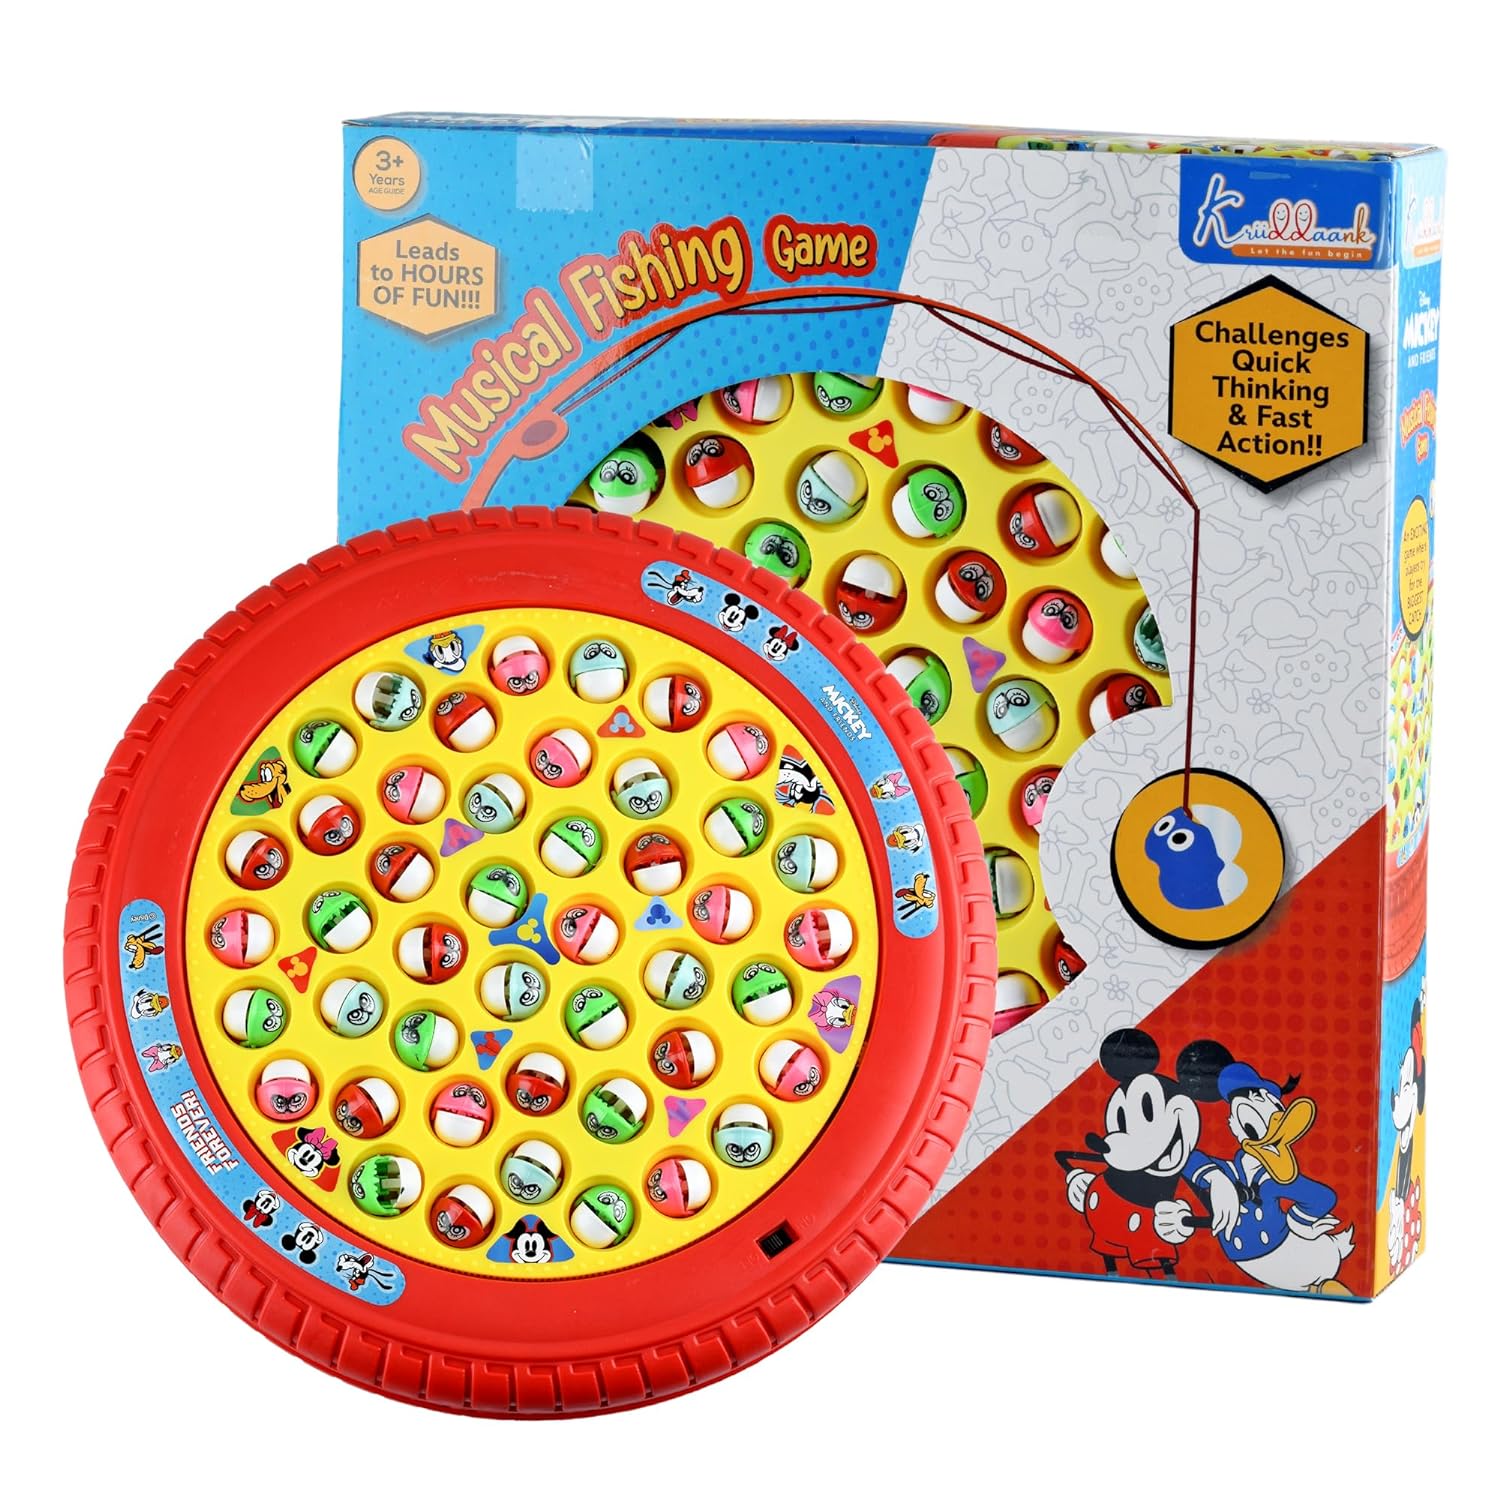 Disney Mickey Musical Fishing Game Fish Catching Board Game Toy 45 Fishes with Big Round Pond & 4 Fish Catching Sticks for Kids